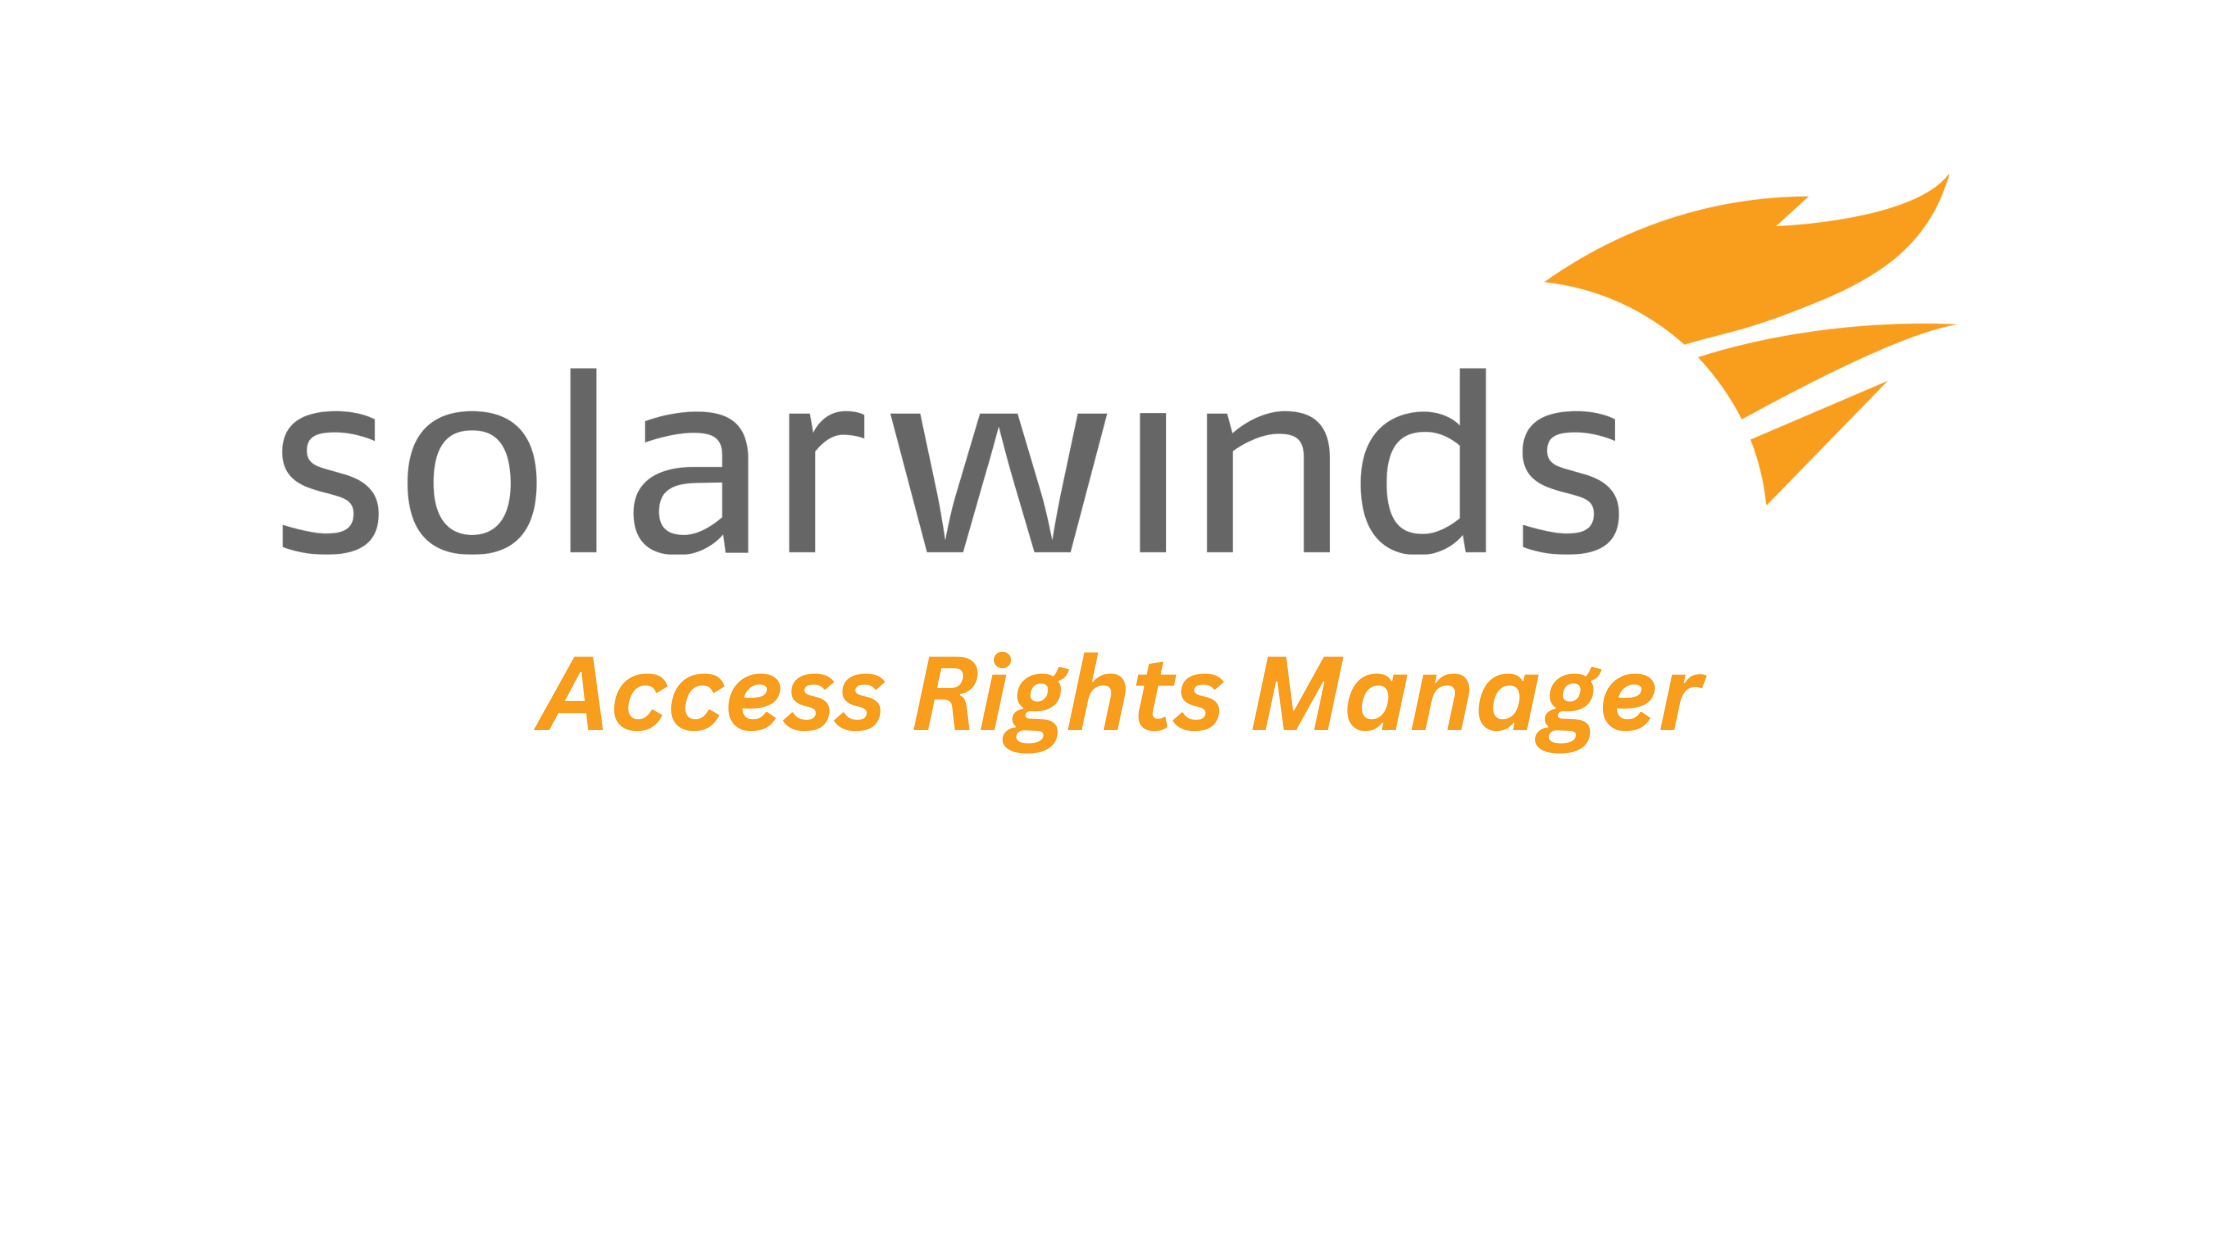 SolarWinds Access Rights Manager (ARM): Empowering Access Governance